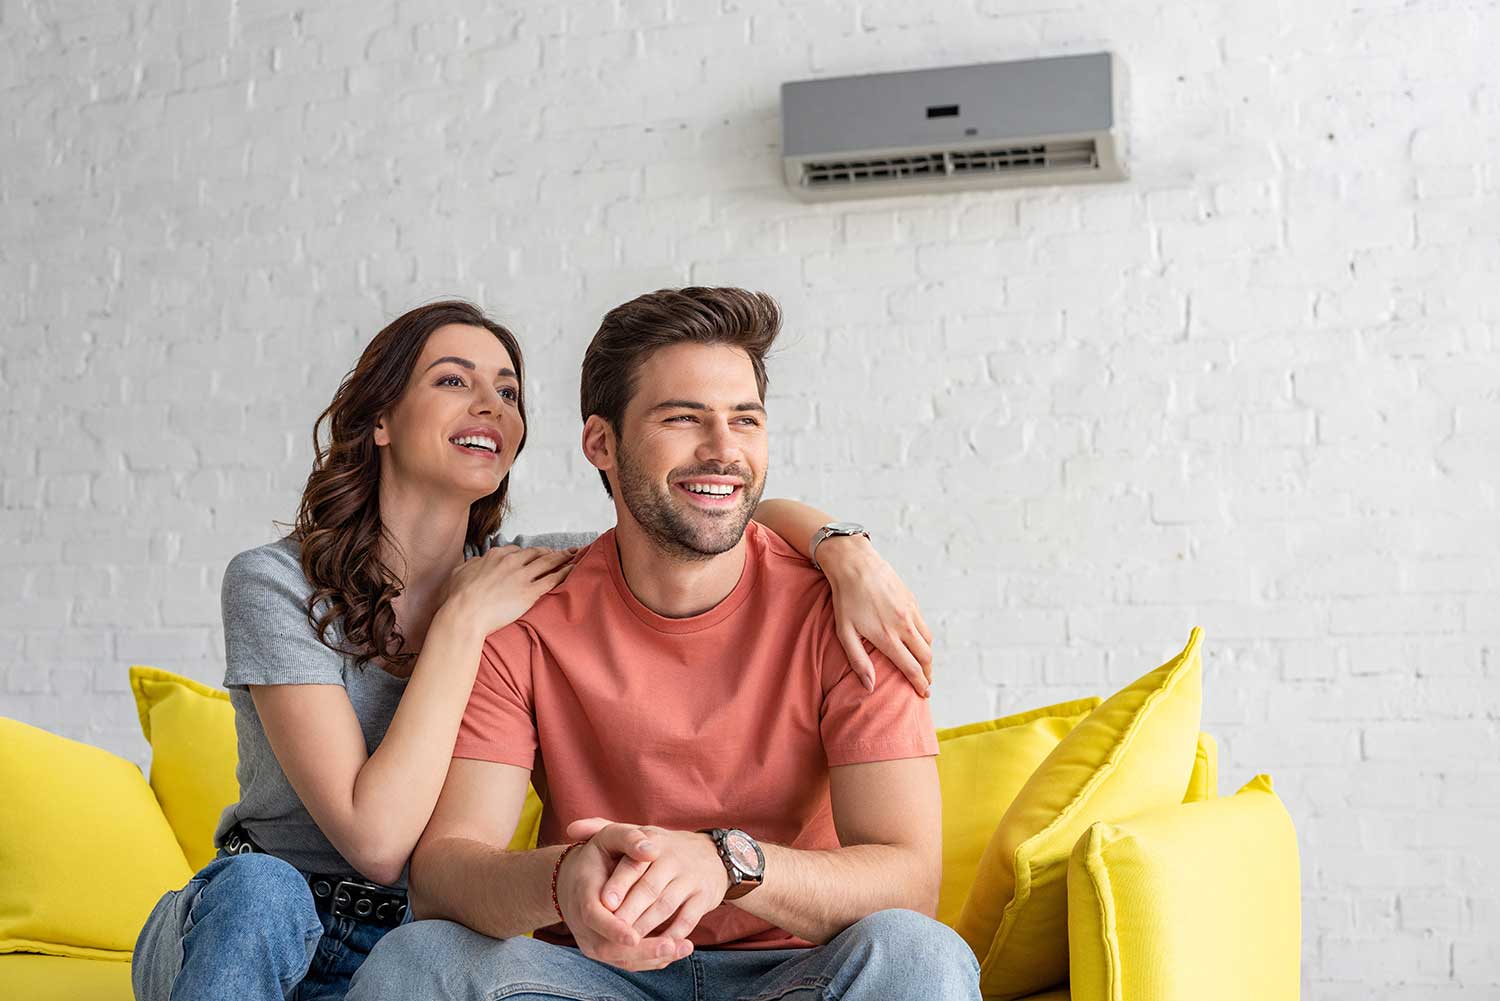 Air conditioning repairs can be affordable for everyone